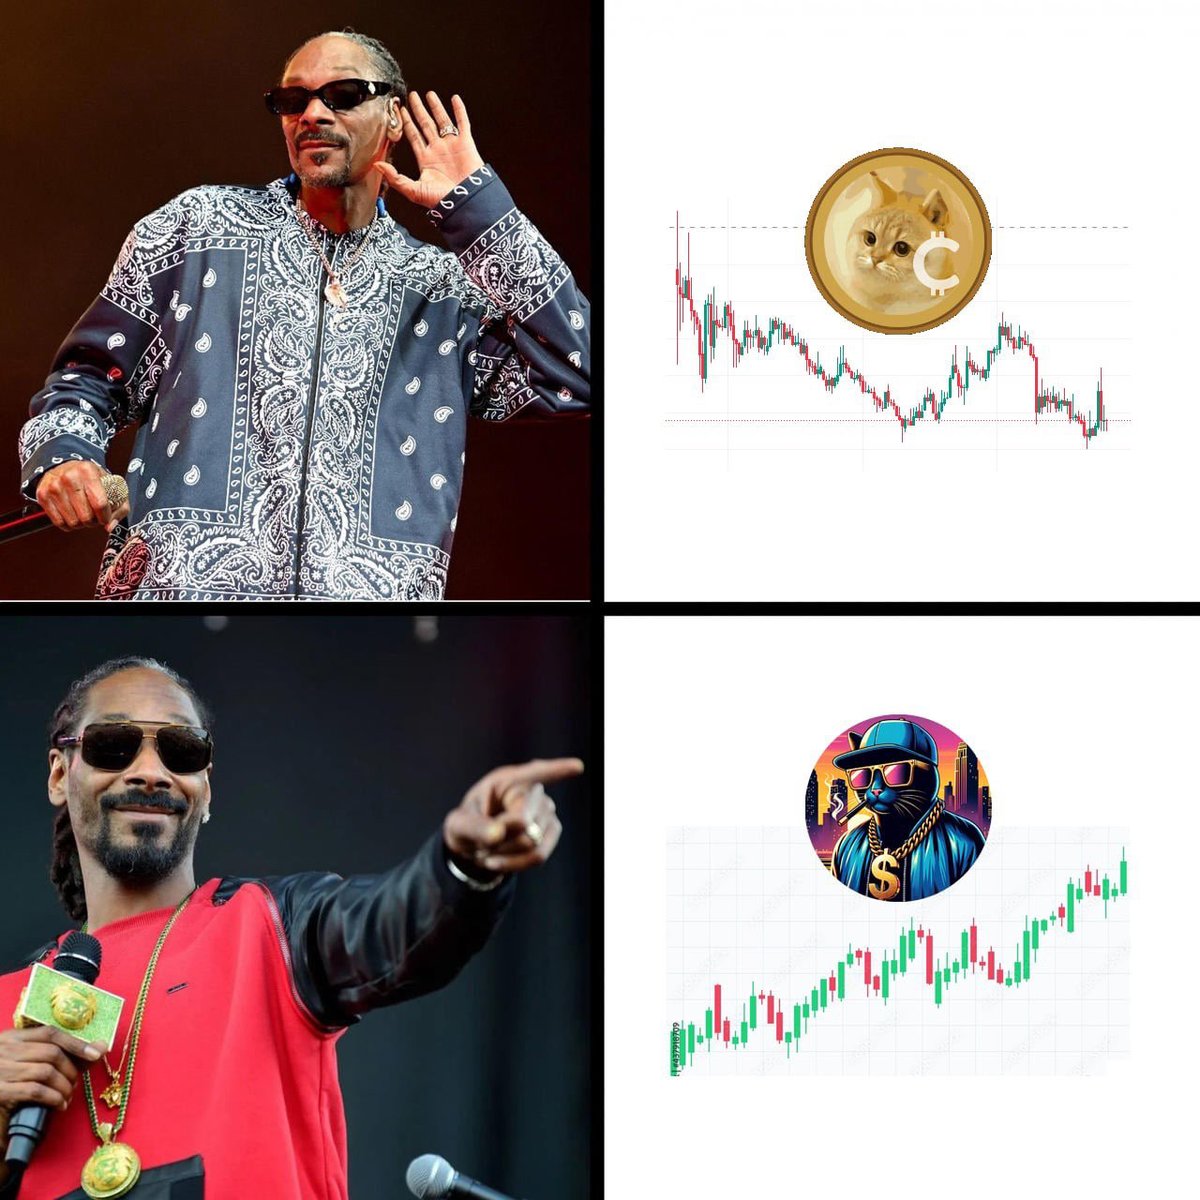 🐱Inspired by the legendary Snoop Dogg but forged in the crucible of the underworld,
🐱 Website: snoopcats.org
🐱 Twitter: twitter.com/snoopcattoken
#snoopcat #memecoin #BSC 
520FYN

#cryptotrading #MichaelSaylor #digitalart #cryptocurrencycommunity #news